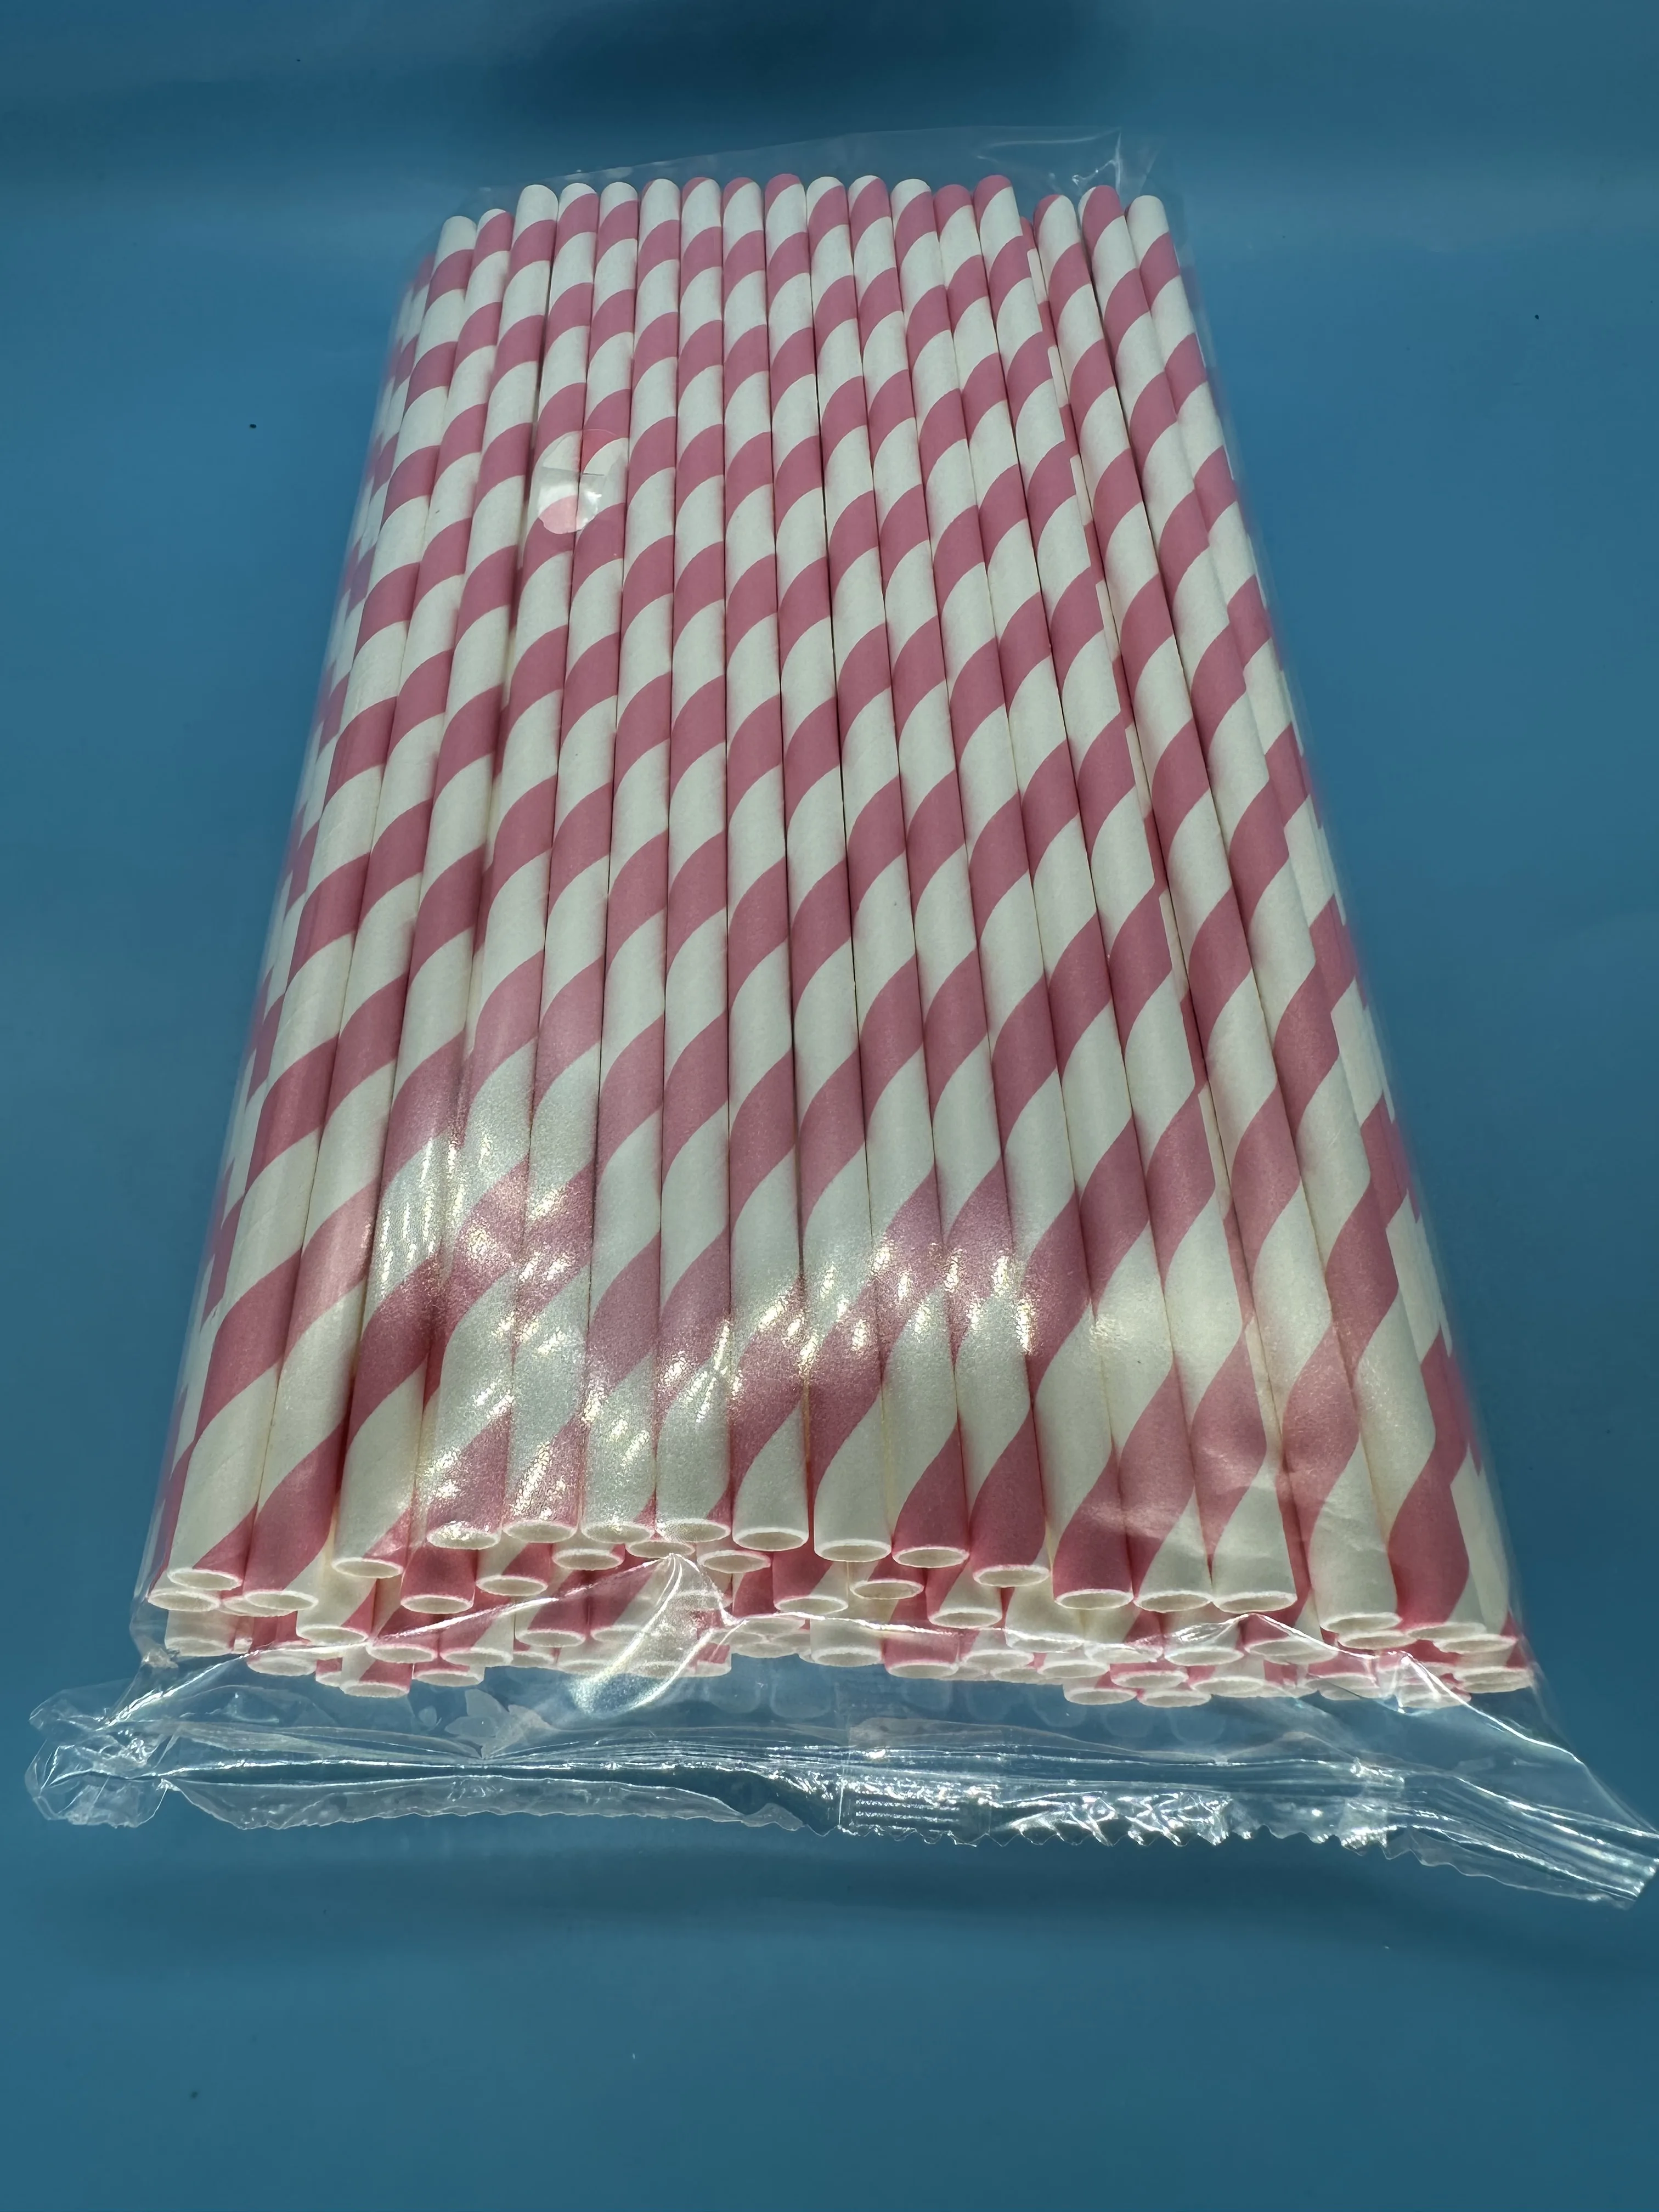 

Wholesale 1,600 Disposable Pink and White Striped Paper Straws - Party Companions for Juice, Coffee, and Drinks